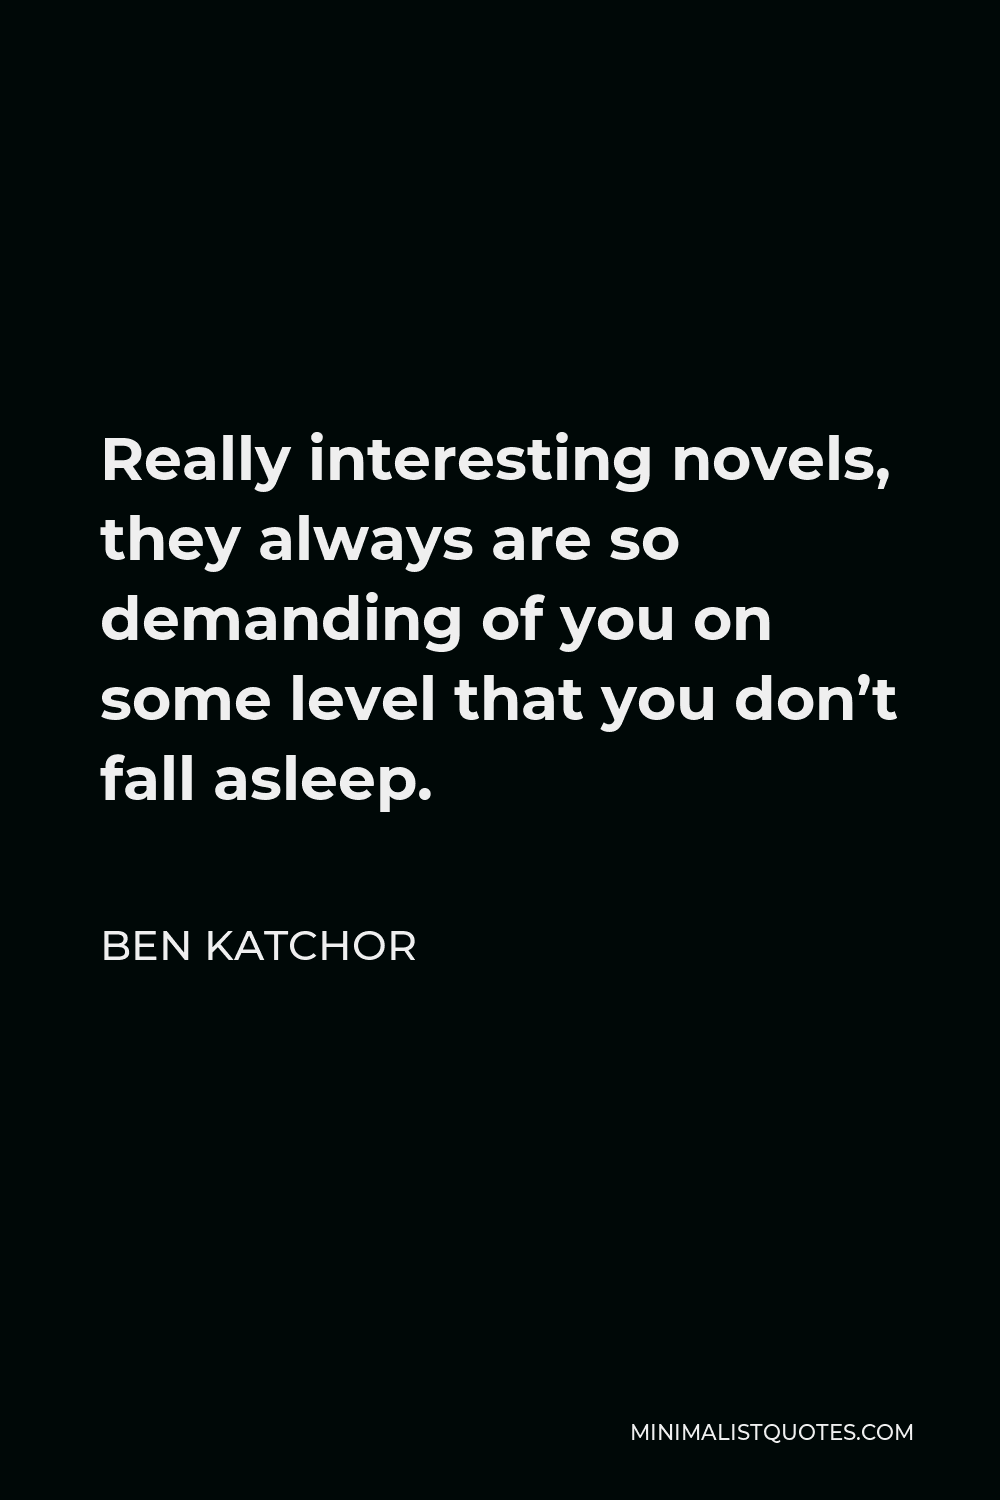 Ben Katchor Quote - Really interesting novels, they always are so demanding of you on some level that you don’t fall asleep.